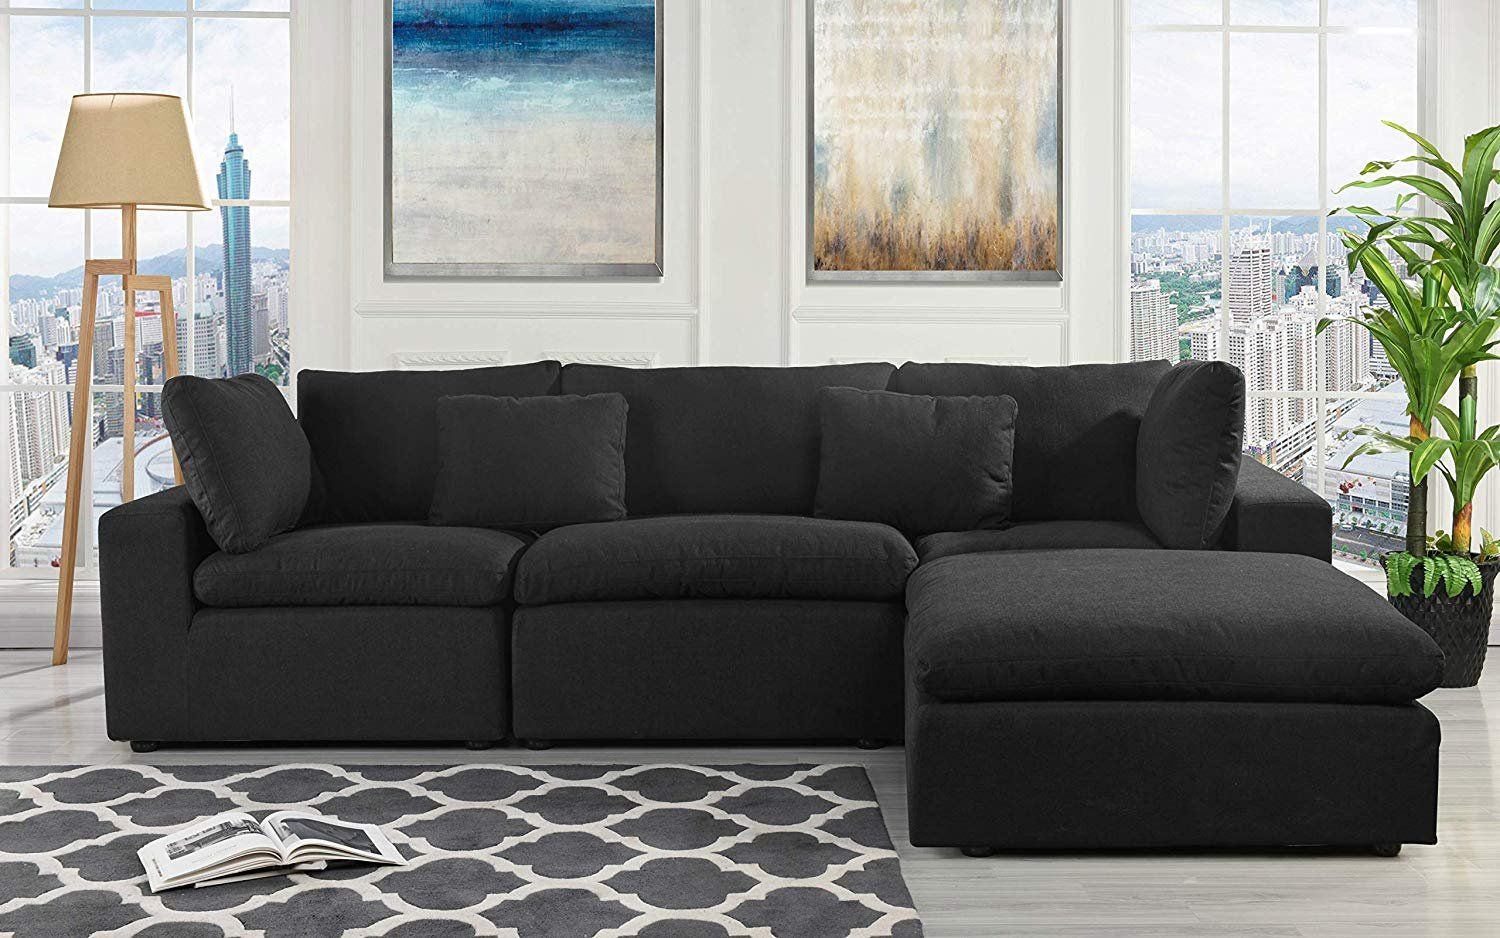 Classic Large Black Fabric Sectional Sofa, L Shape Couch With Wide Intended For Traditional Black Fabric Sofas (Gallery 4 of 21)